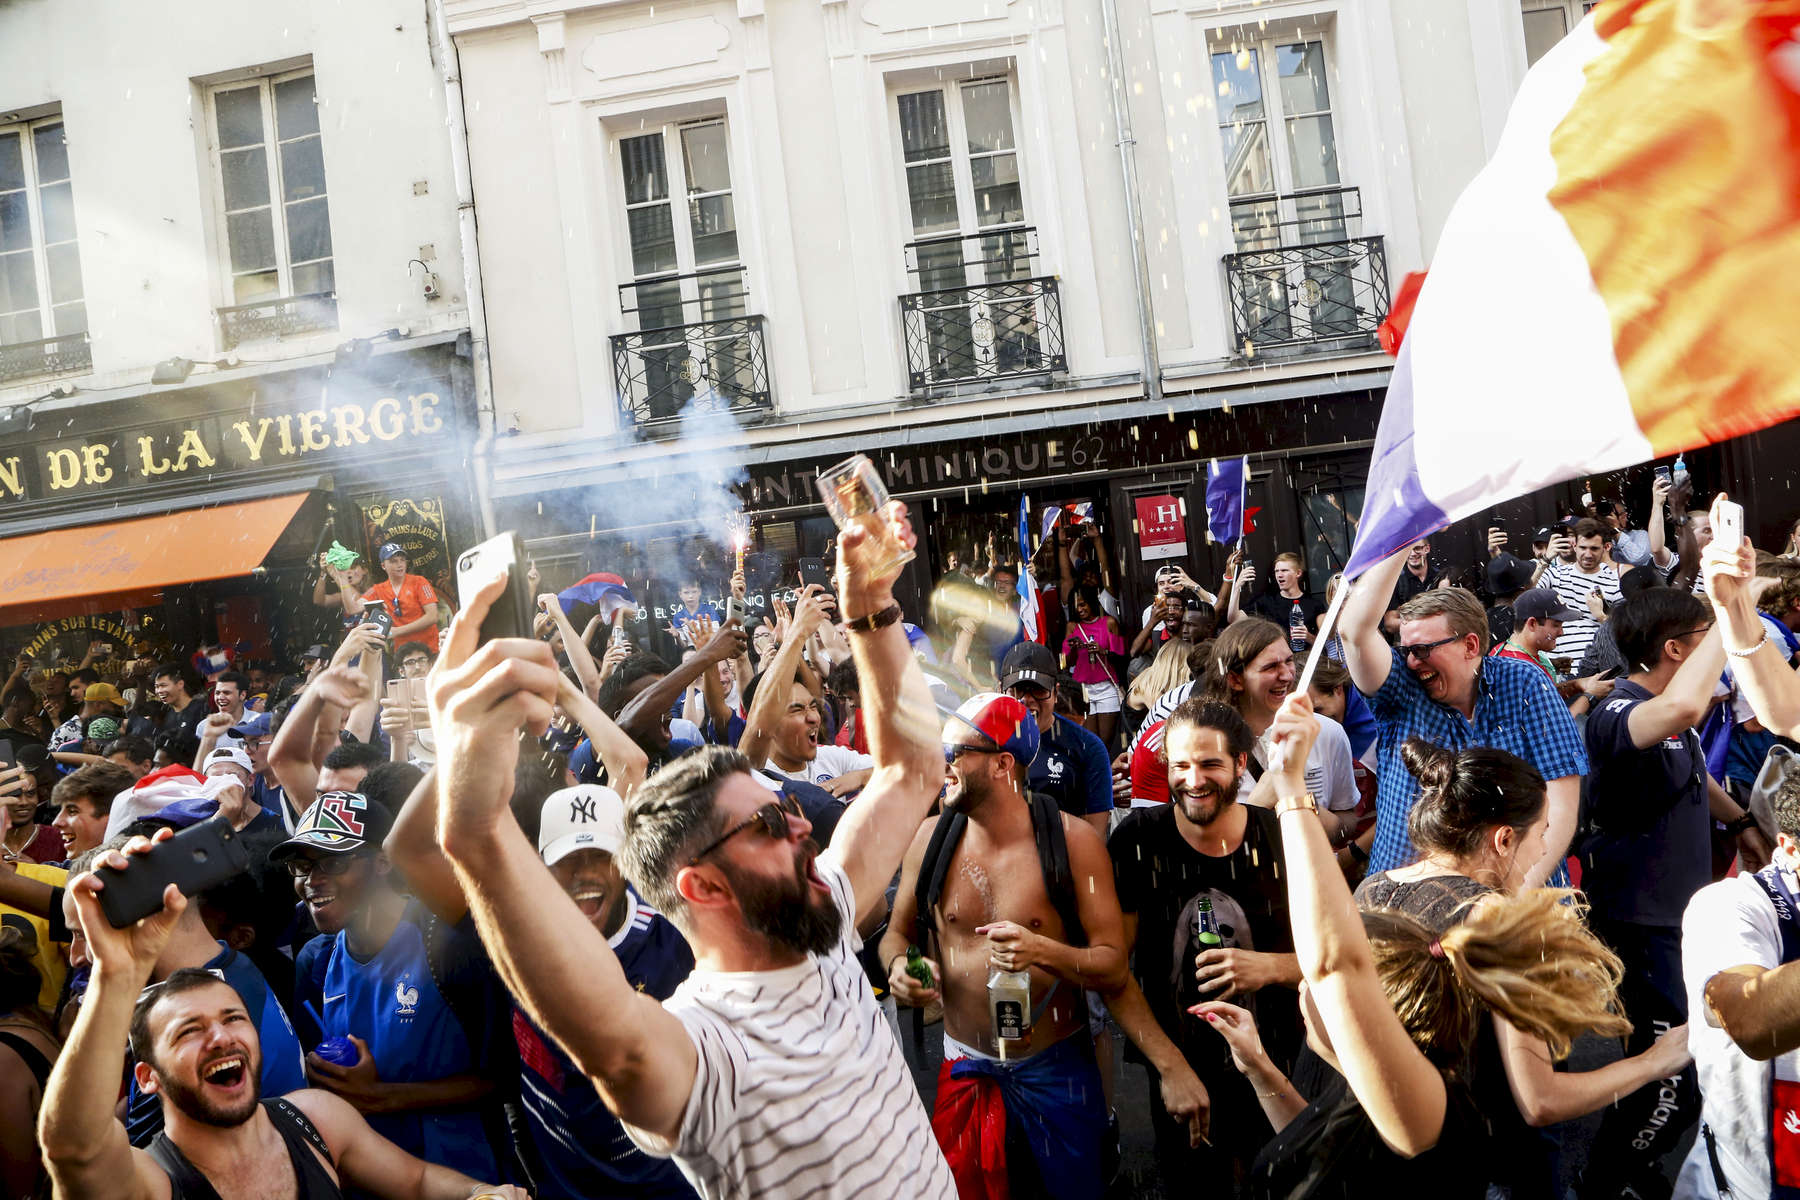 Supporters celebrate in the streets after France just won the 2018 World Cup, on July 15, 2018, in Paris France.On the historical Soccer World Cup final between France and Croatia, fans were invited to watch the game on giant screens set up in the Champs de Mars, in front of the Eiffel Tower in Paris. But this Fan Zone was full long before the start of the game, leaving thousand of supporters scrambling to find a place to watch the game close by. The nearby and usually quiet coffees and restaurants were quickly over flooded. But for the next two and a half hours, it did not matter to watch the game from the middle of the streets. Very few cars were circulating, because almost everyone in France was watching, or trying to watch the game. 